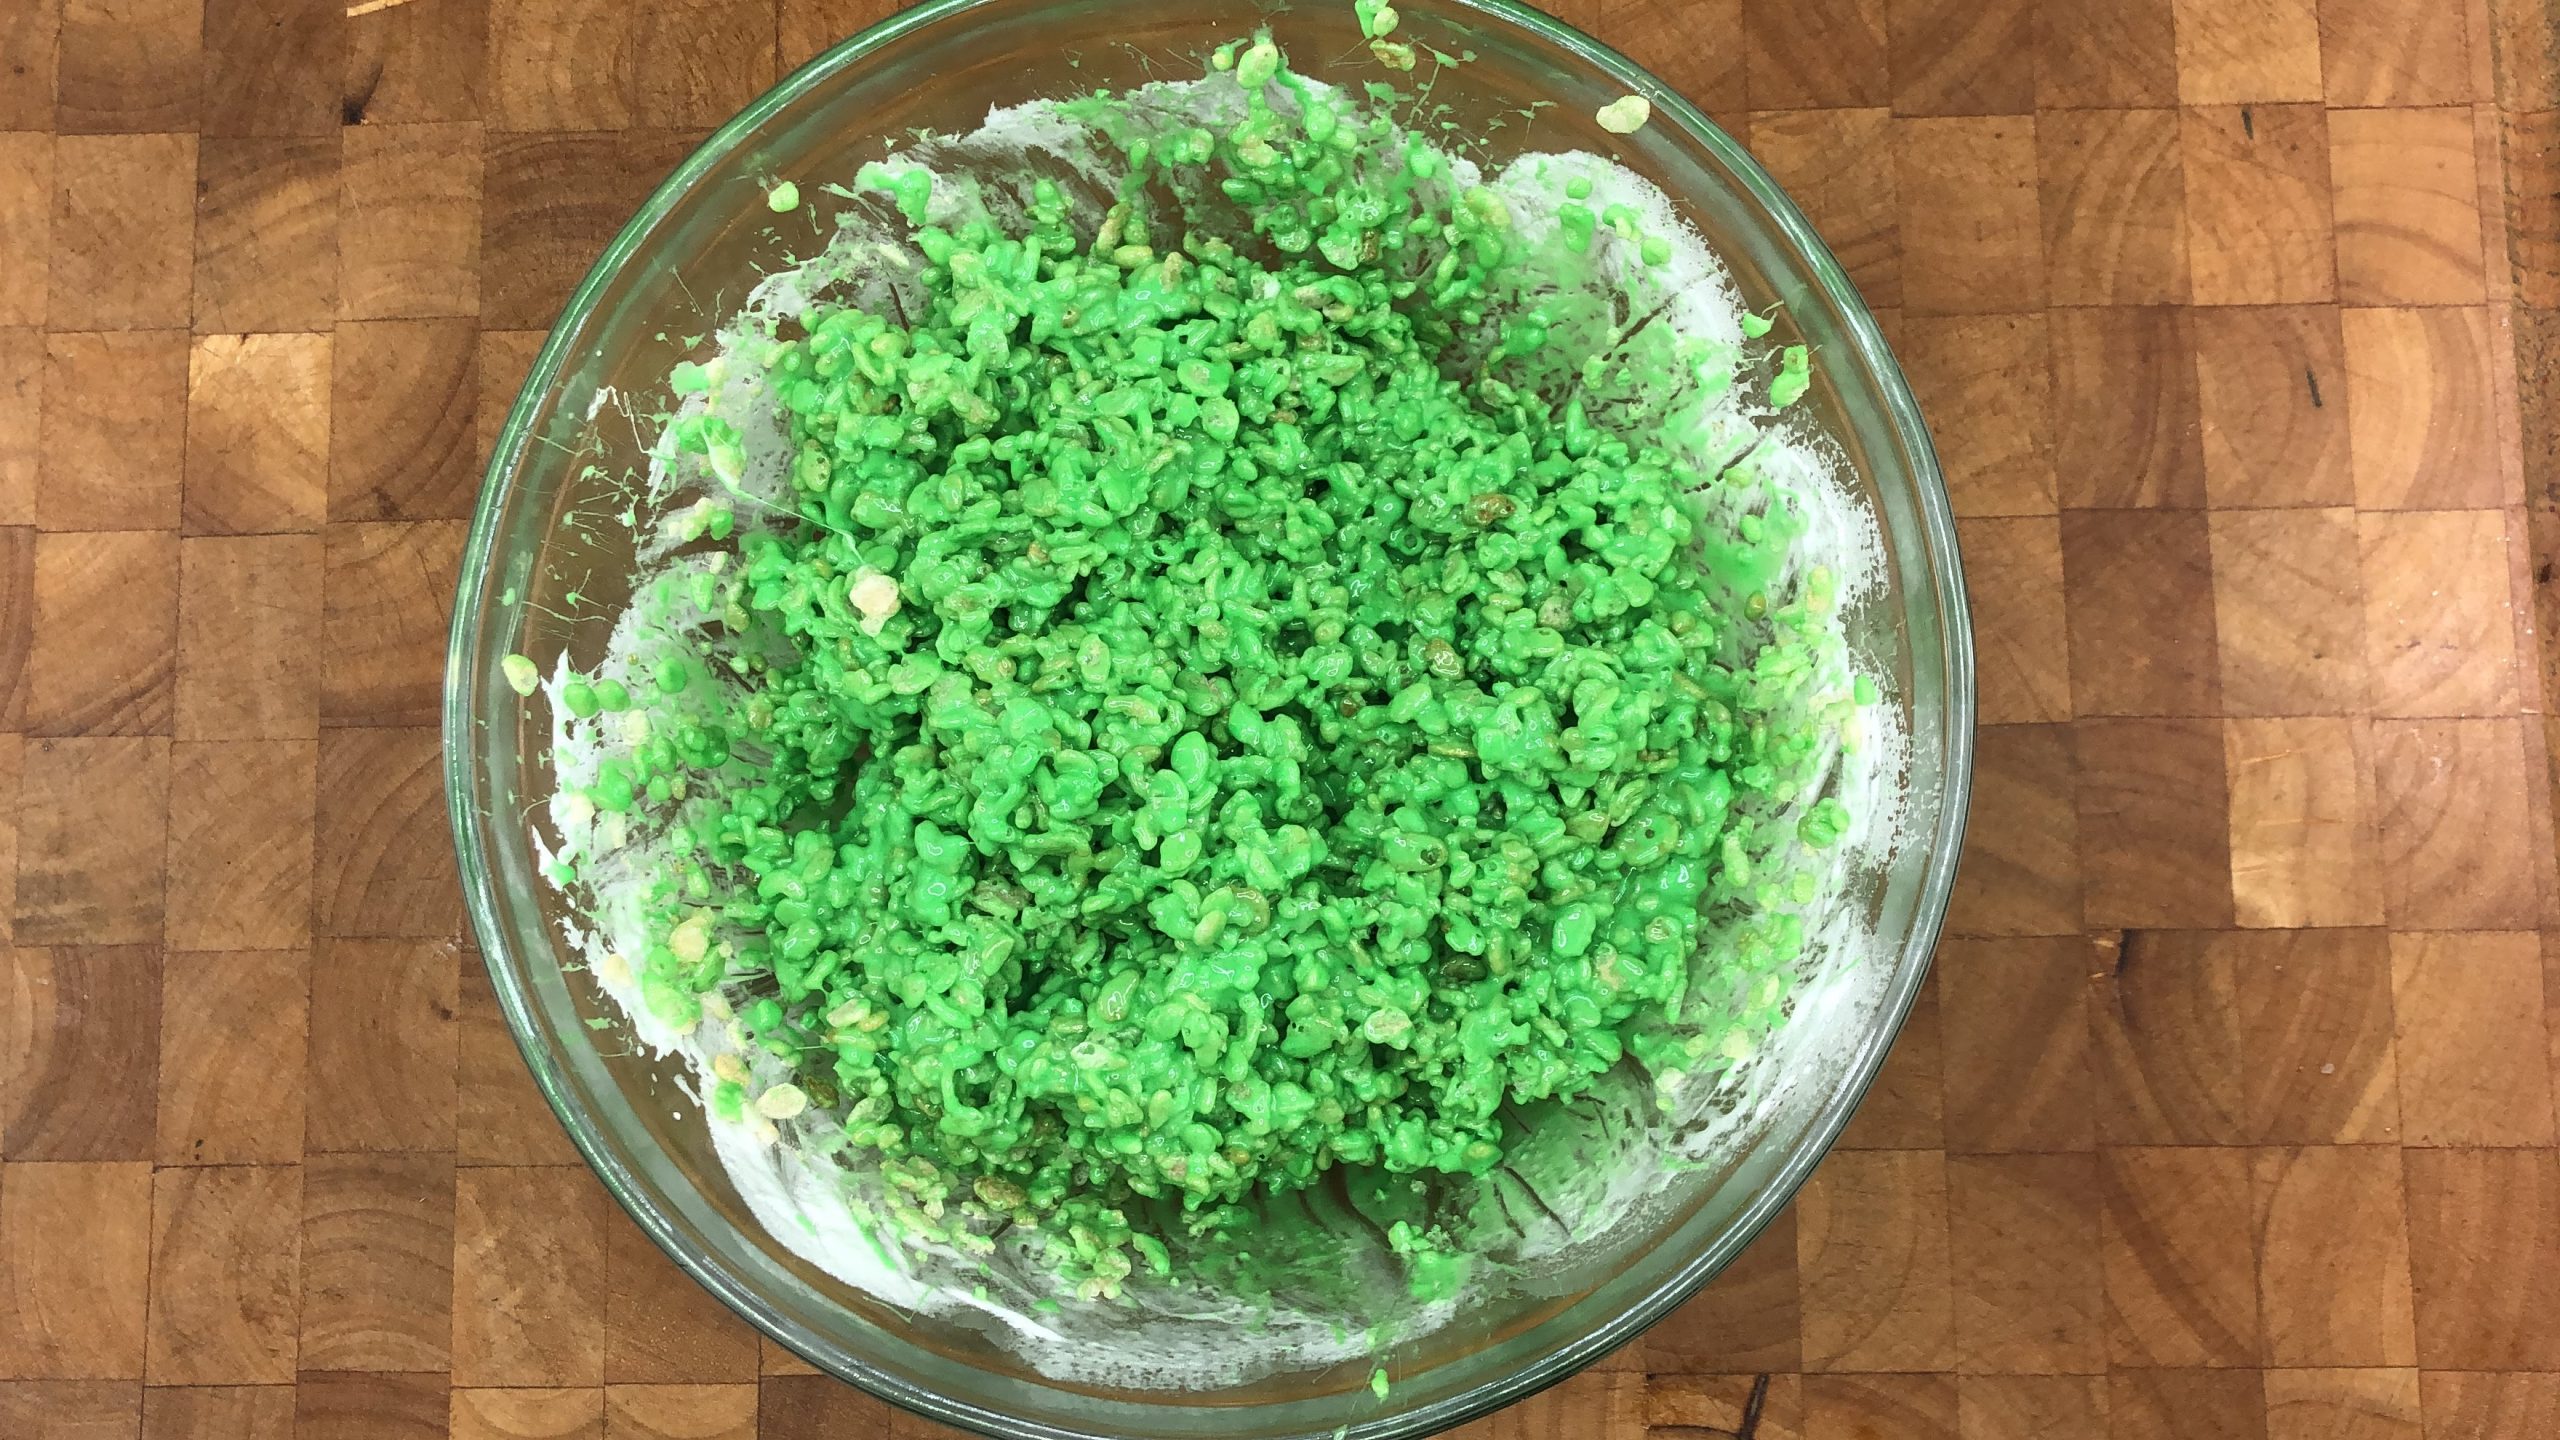 mixing green food coloring, butter, marshmallows and cereal in a bowl